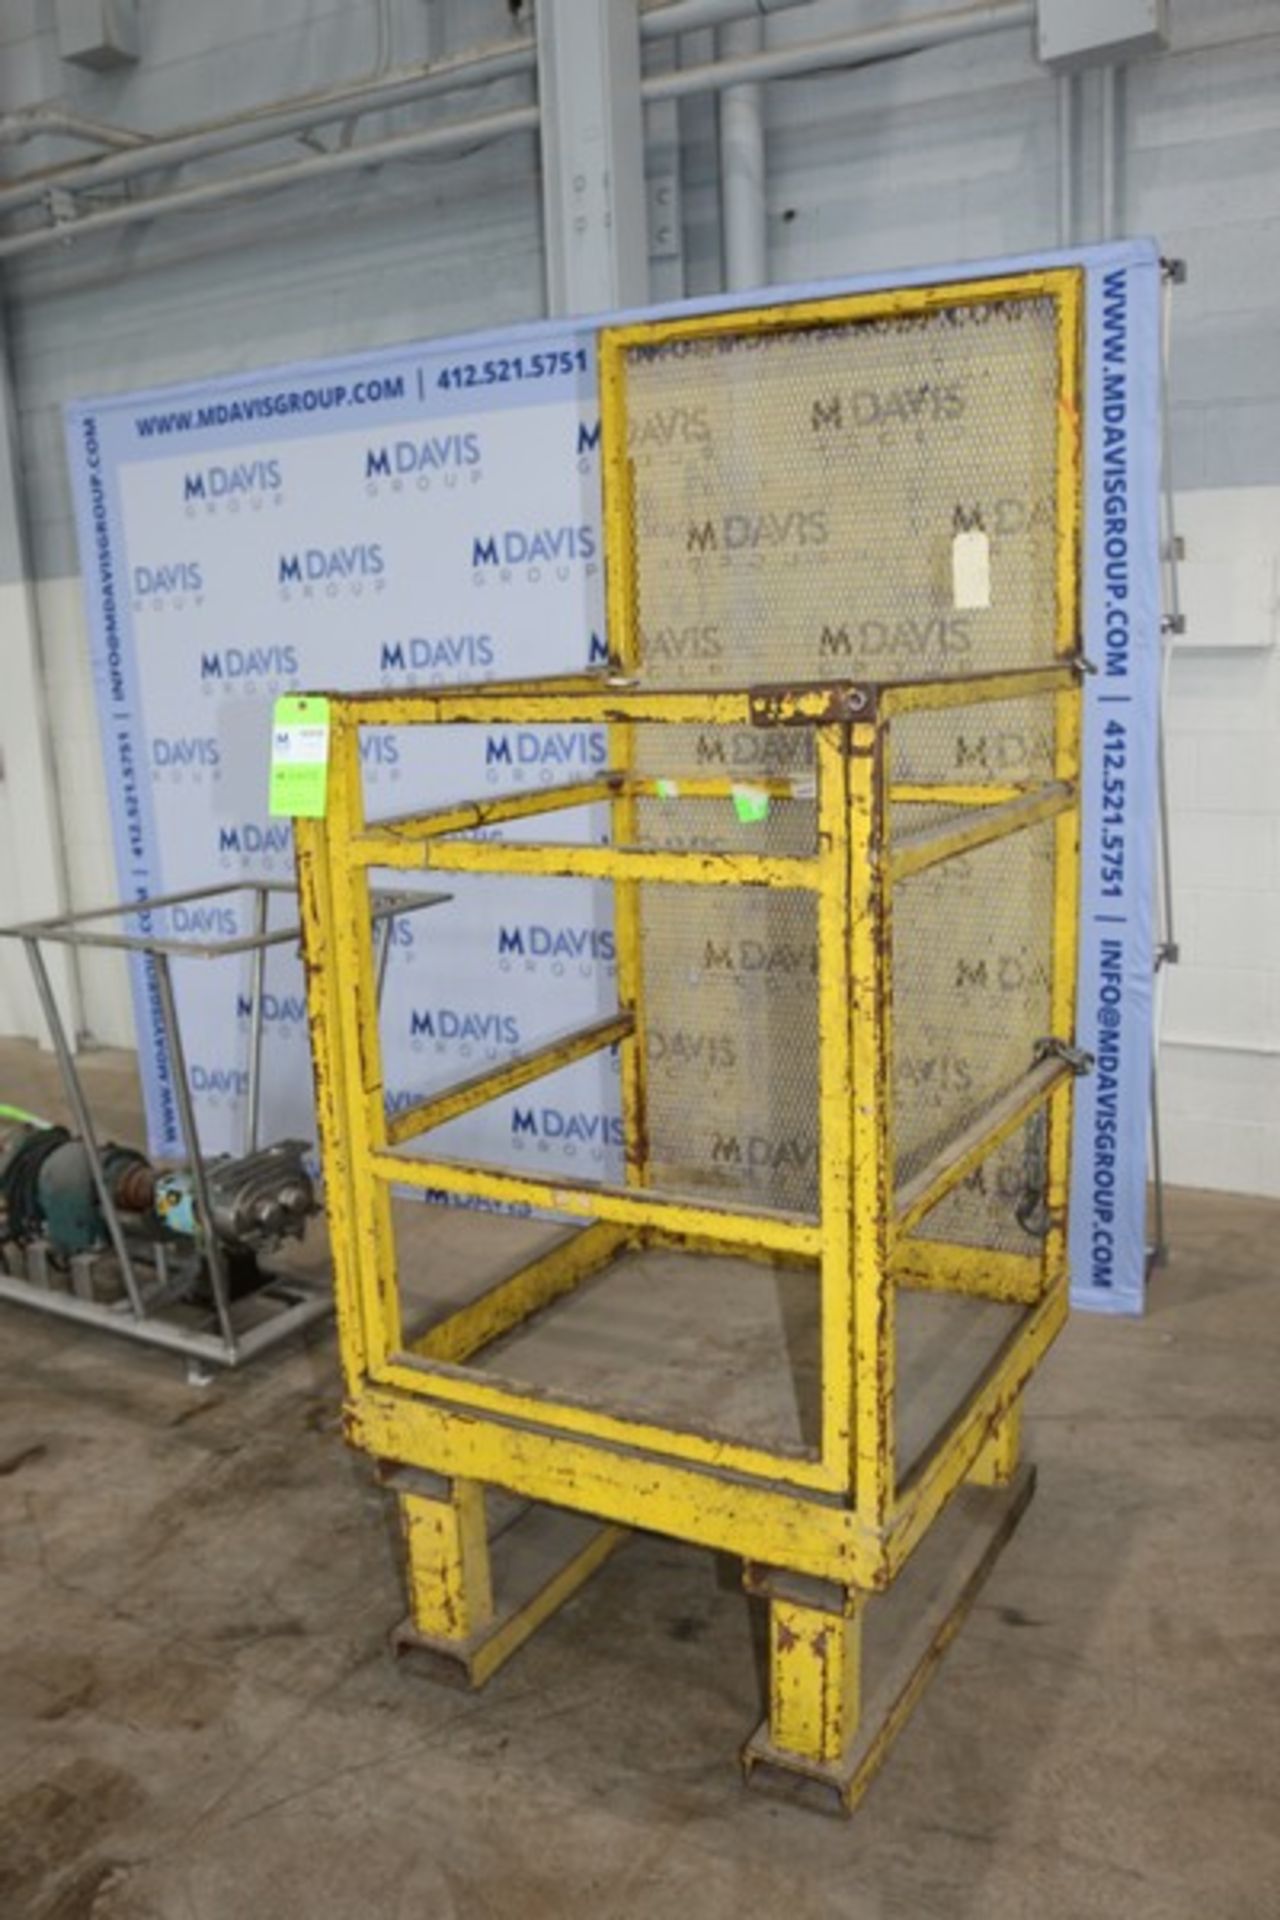 Man Cage Forklift Attachment, Overall Dimensions: Aprox. 37" L x 33-1/2" W x 82" H, with Swing - Image 2 of 4